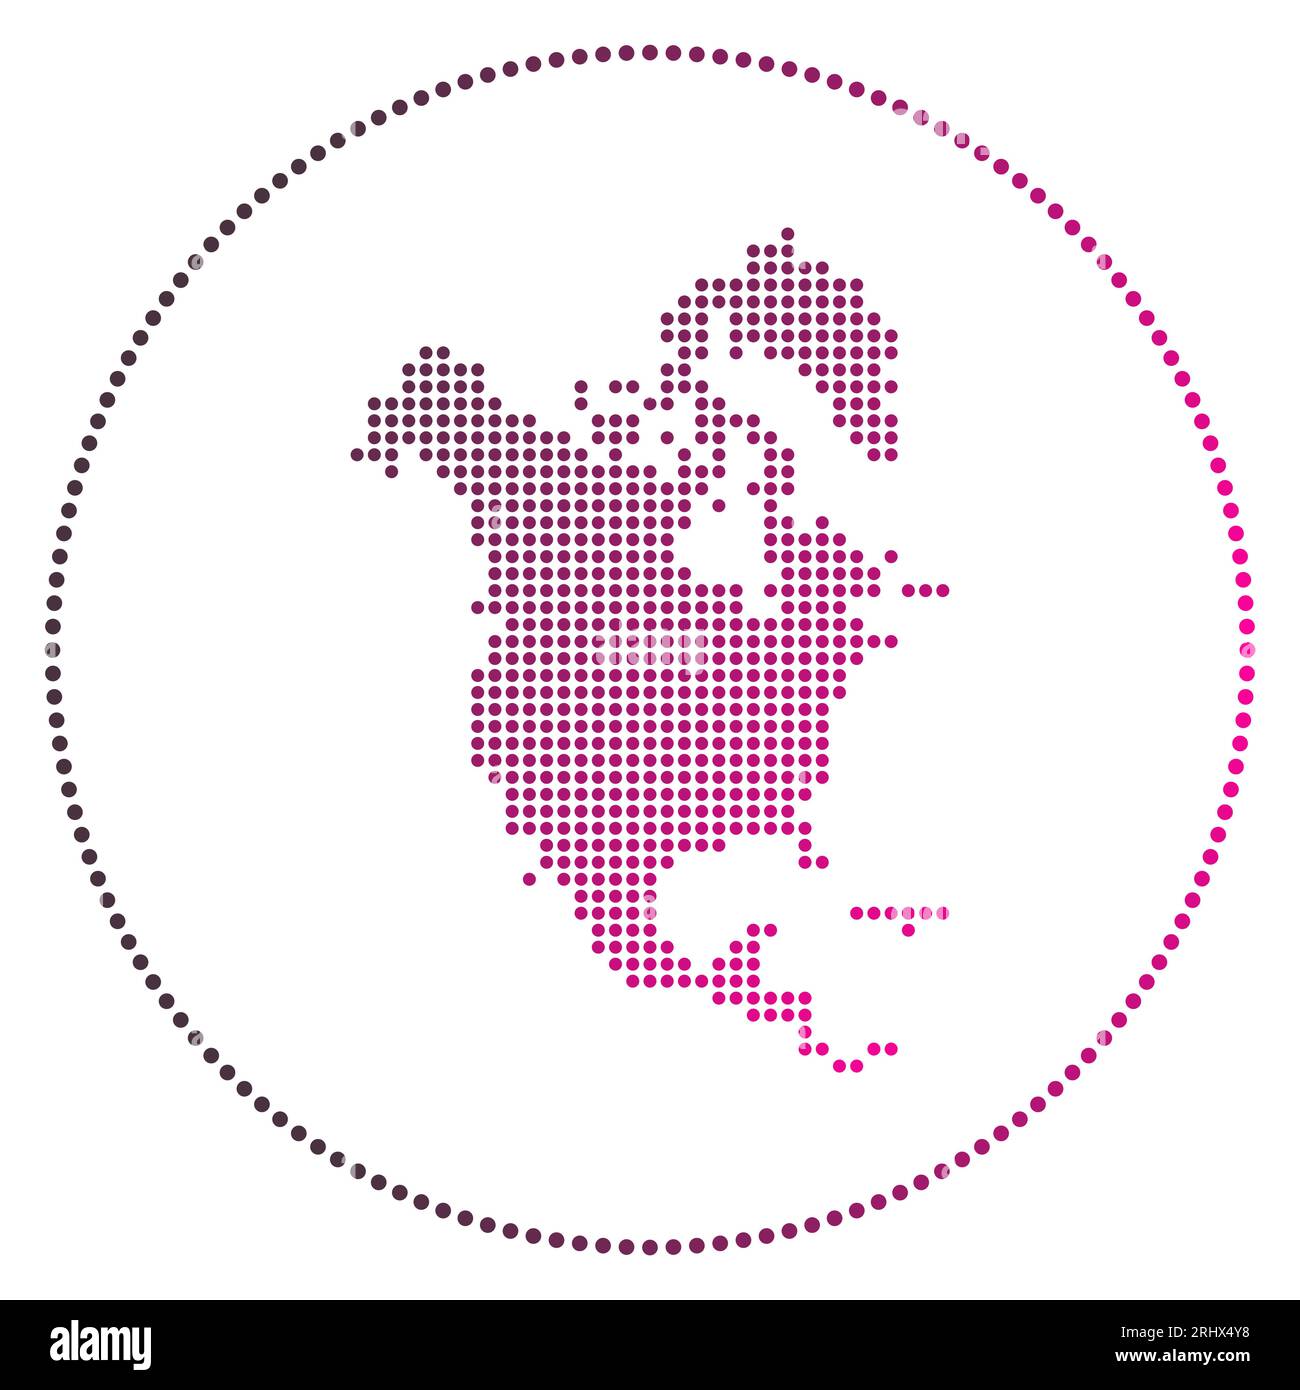 North America digital badge. Dotted style map of North America in circle. Tech icon of the continent with gradiented dots. Astonishing vector illustra Stock Vector